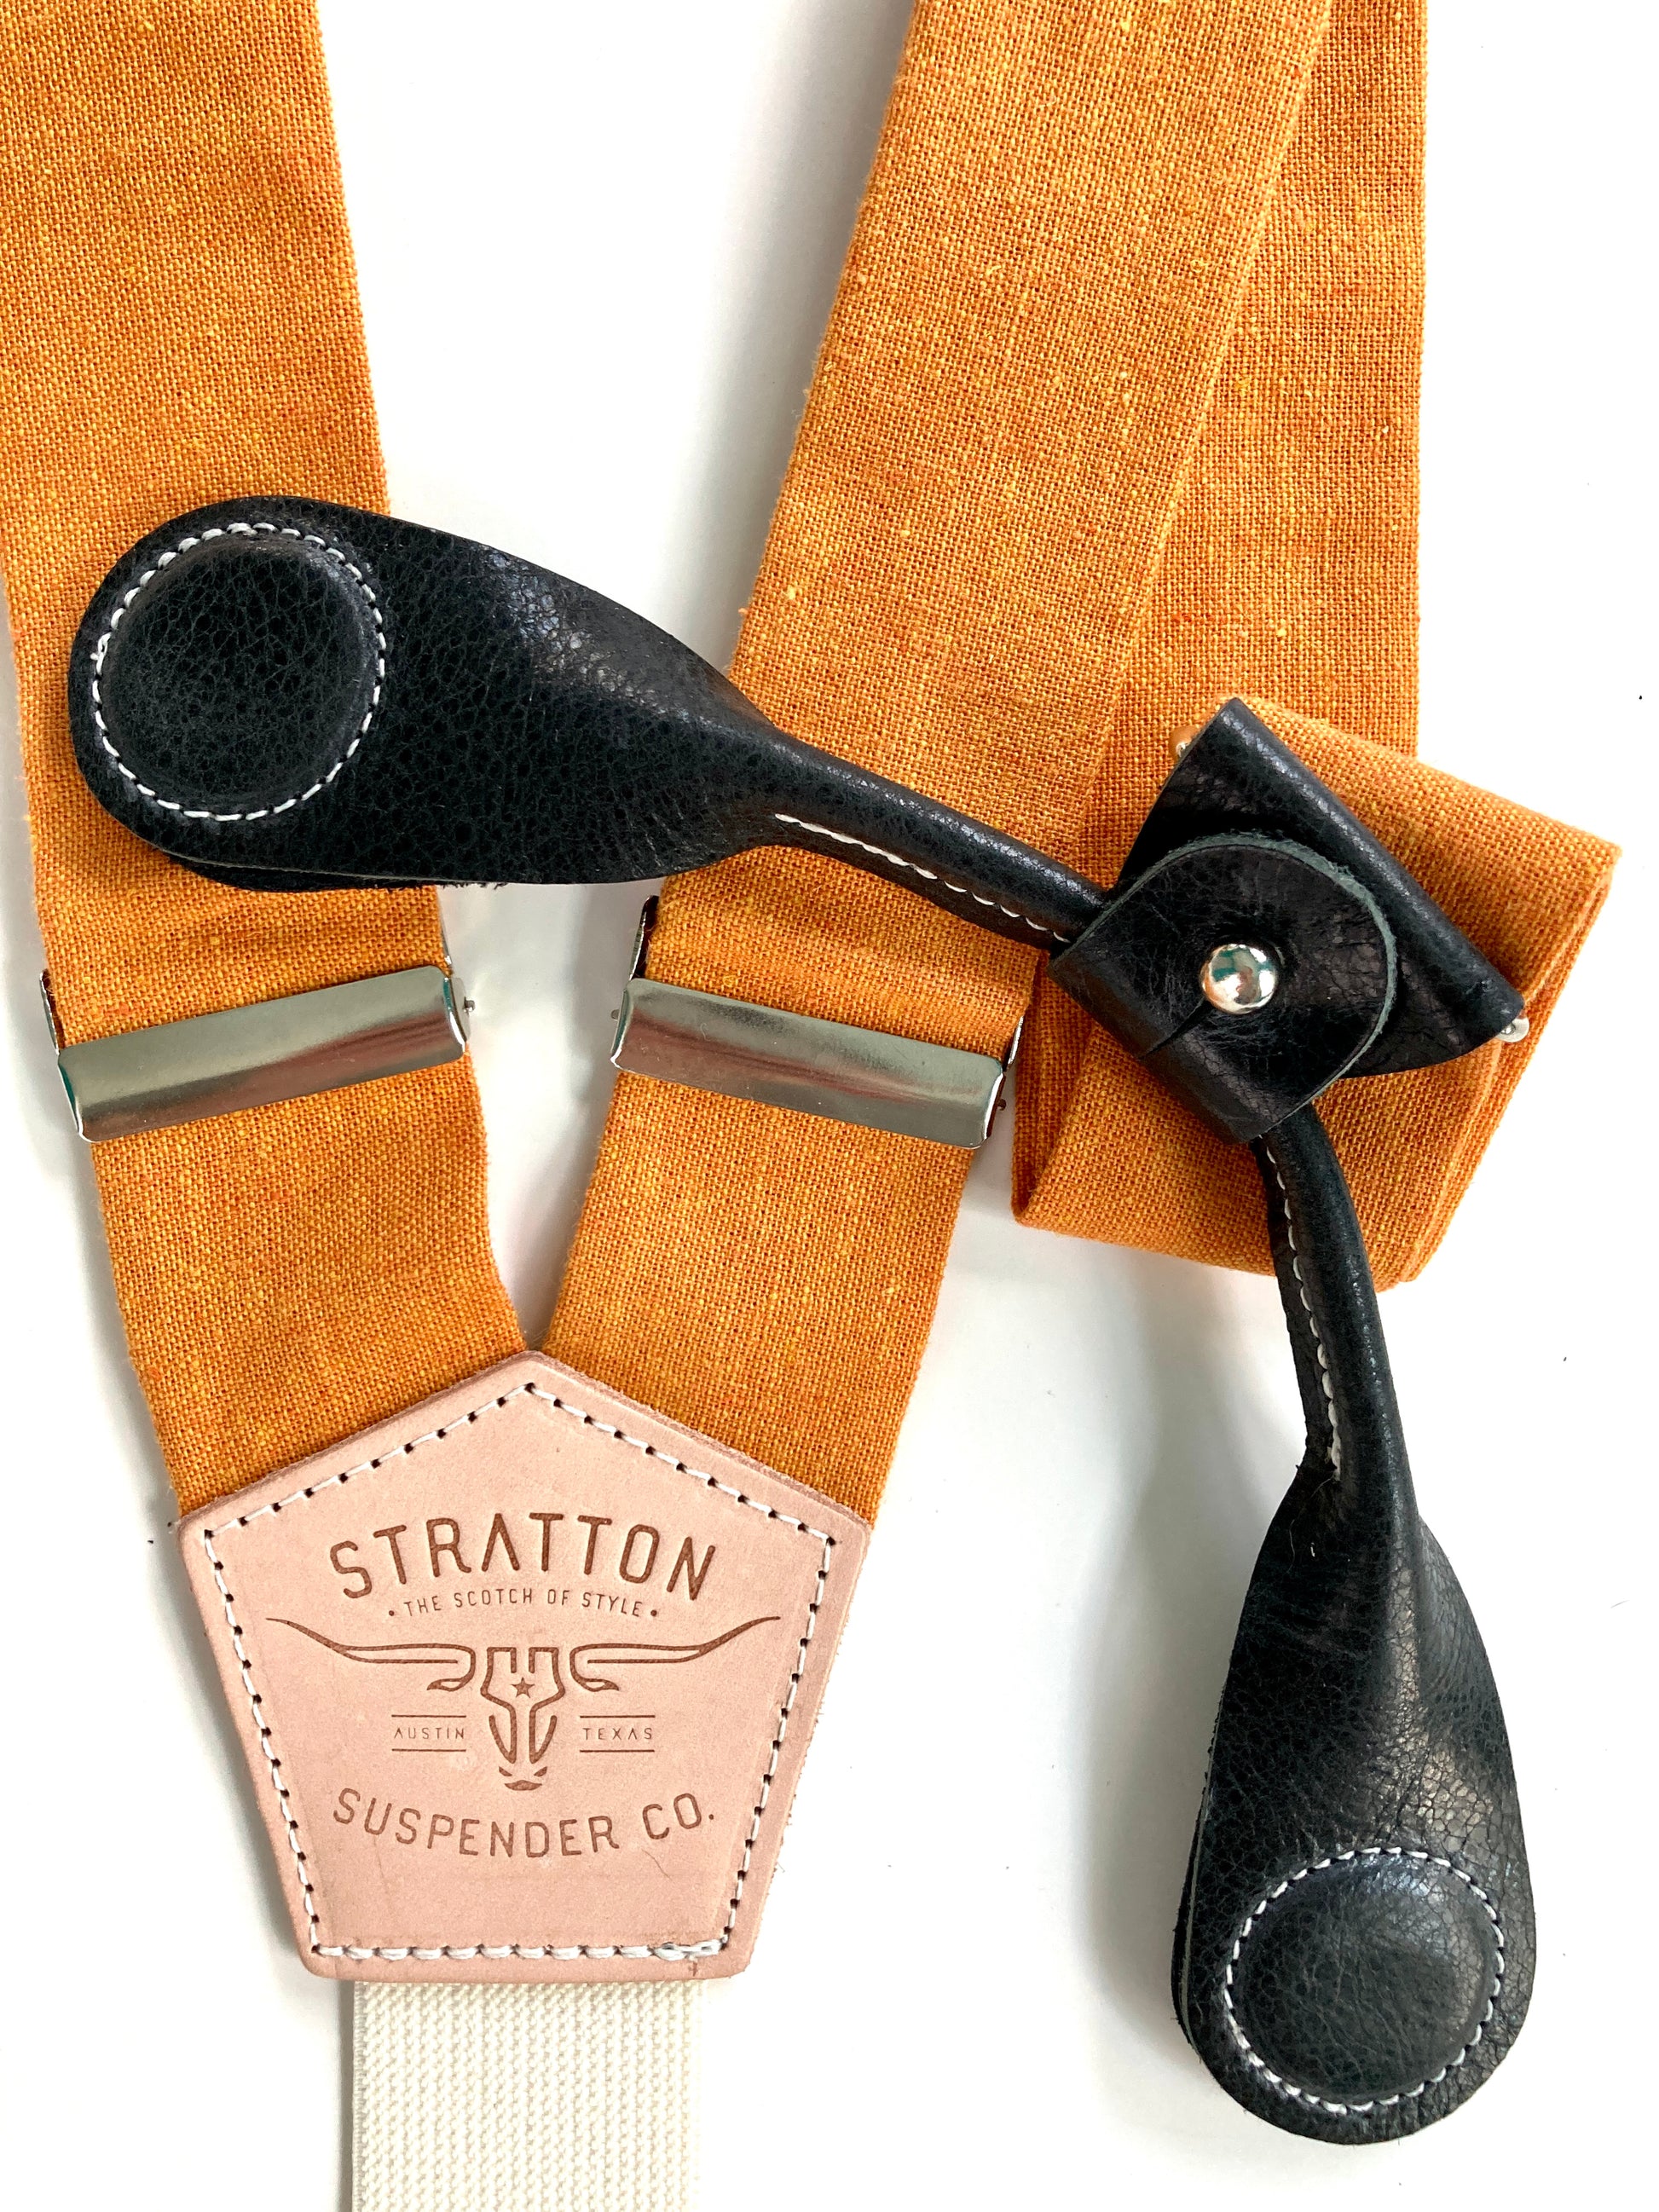 Stratton Suspender Co. features the orange linen suspenders on veg tan shoulder leather with cream colored elastic back strap for the Fall 2022 suspenders collection Magnetic Stratton Suspender clasps in Black Pontedero Italian leather hand-picked by Stratton Suspender Co.